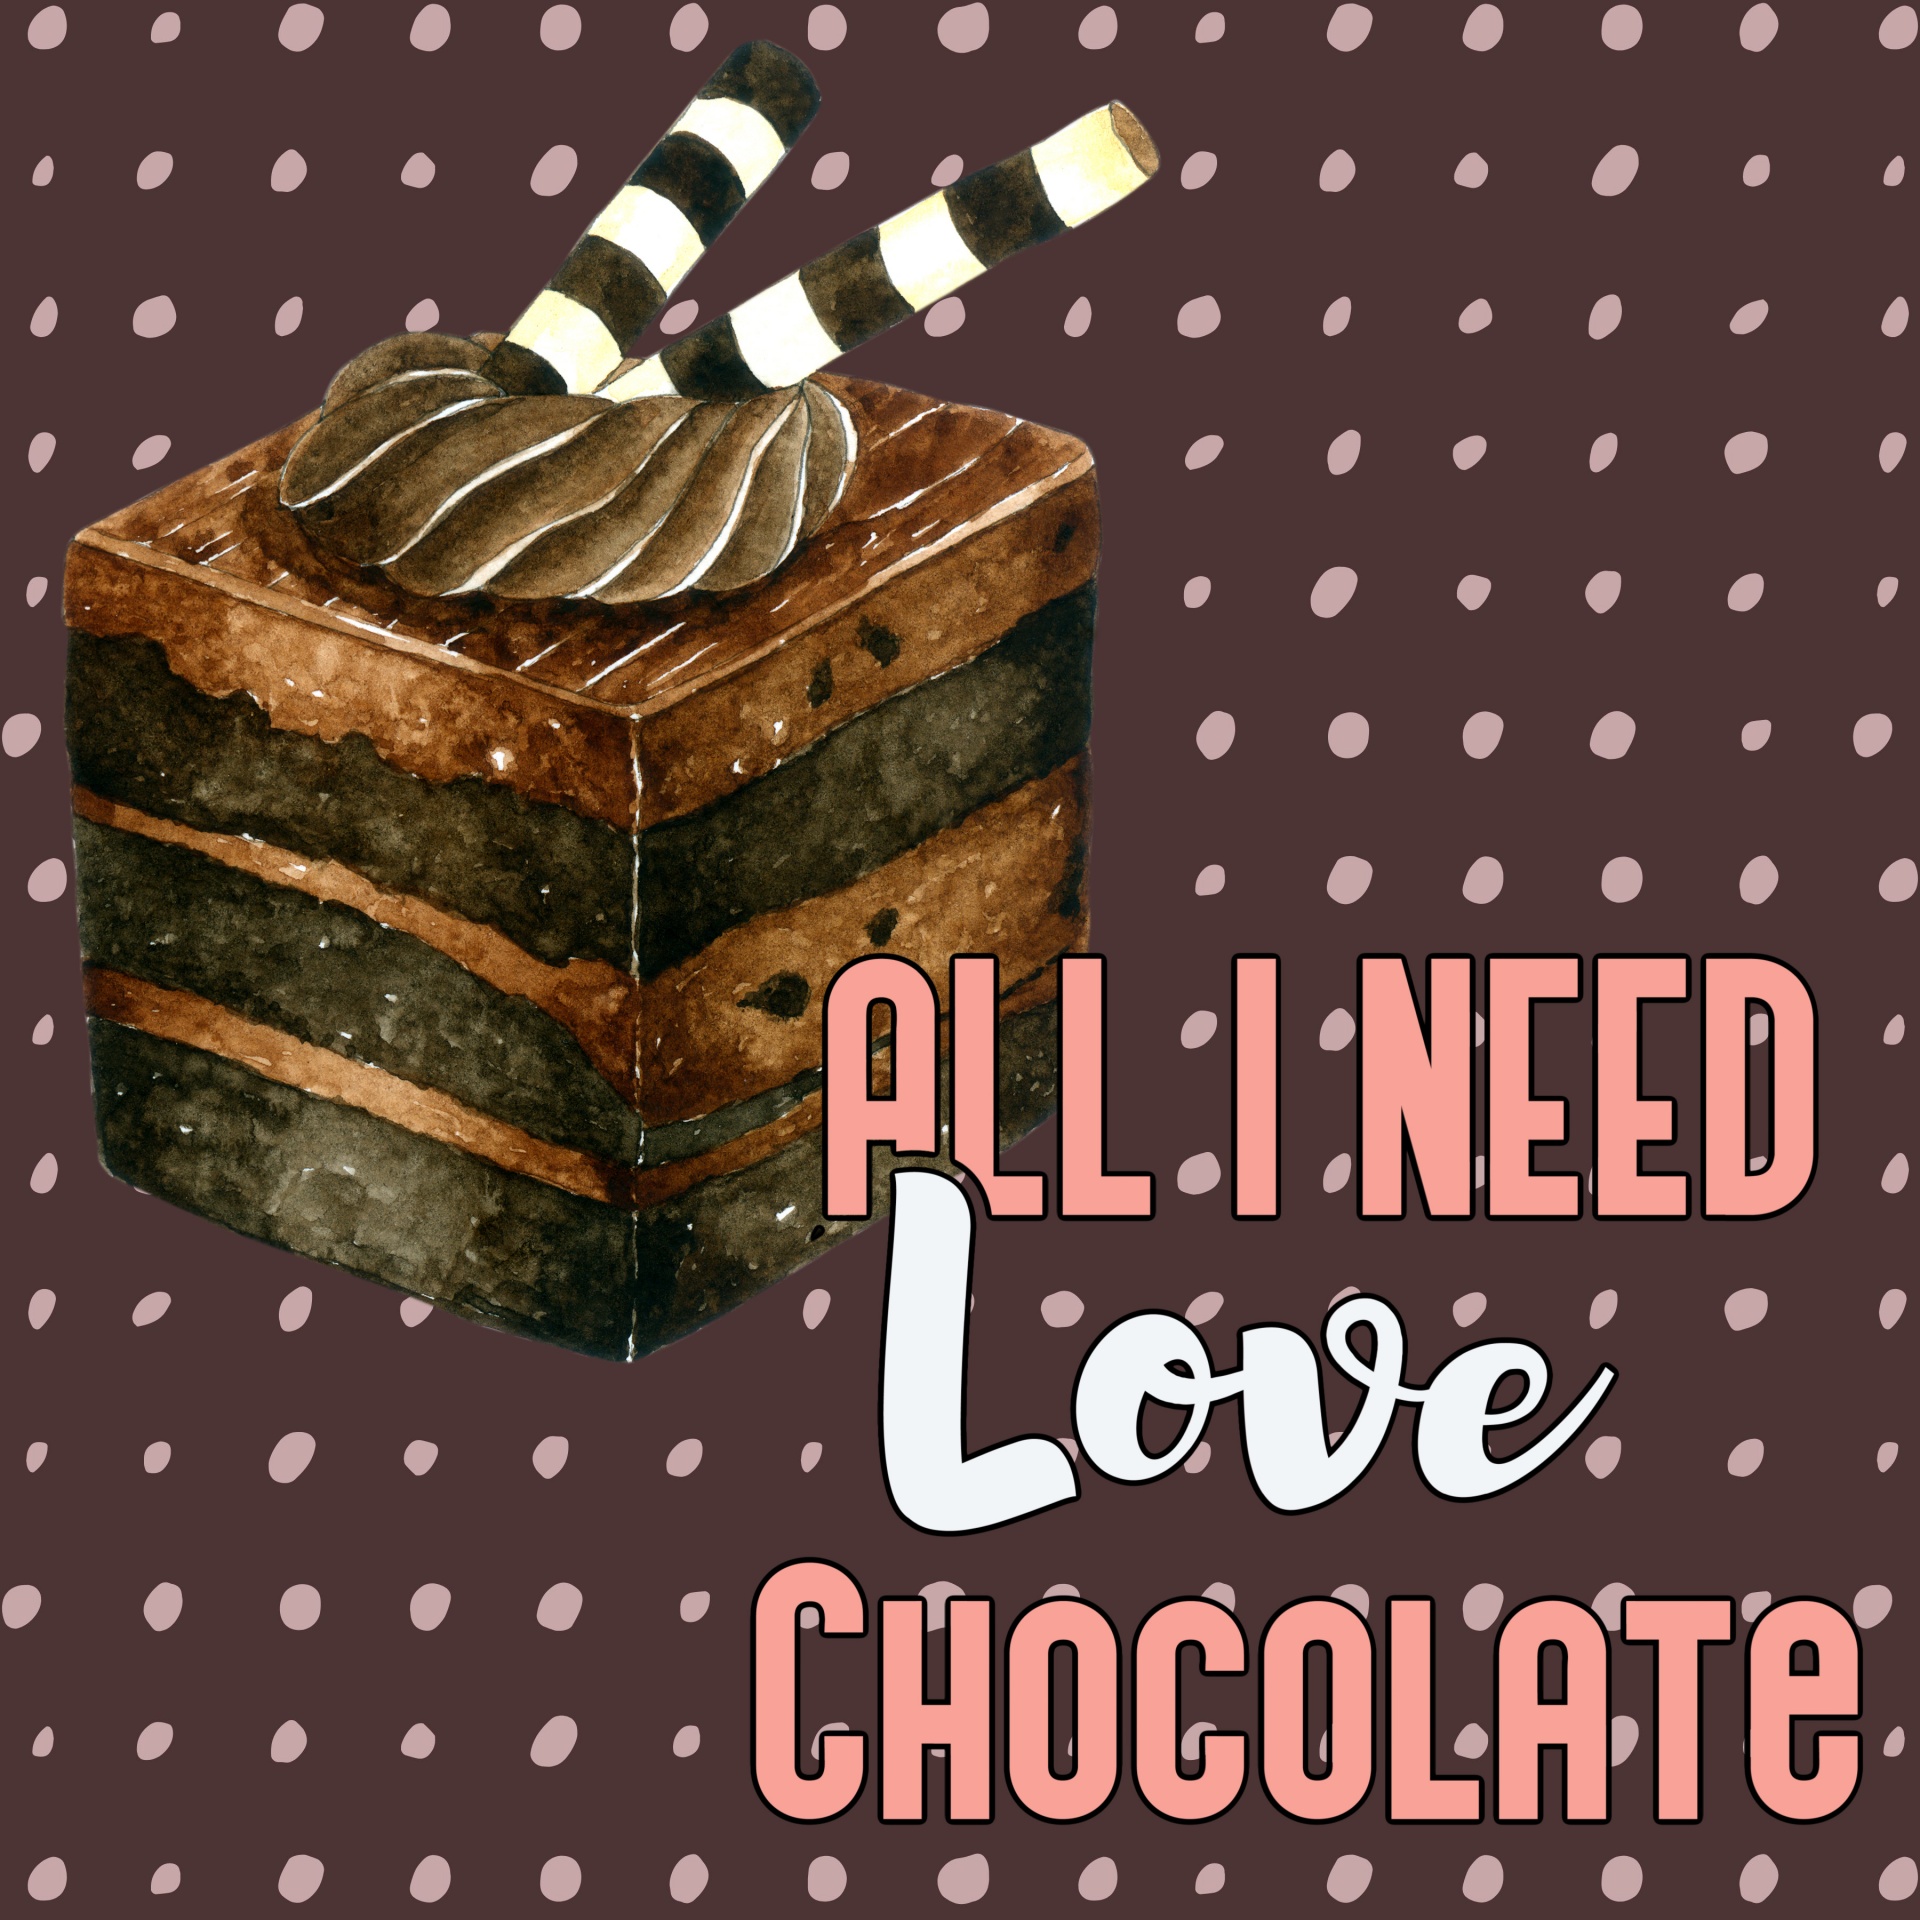 all i need love chocolate words next to a decadent chocolate dessert